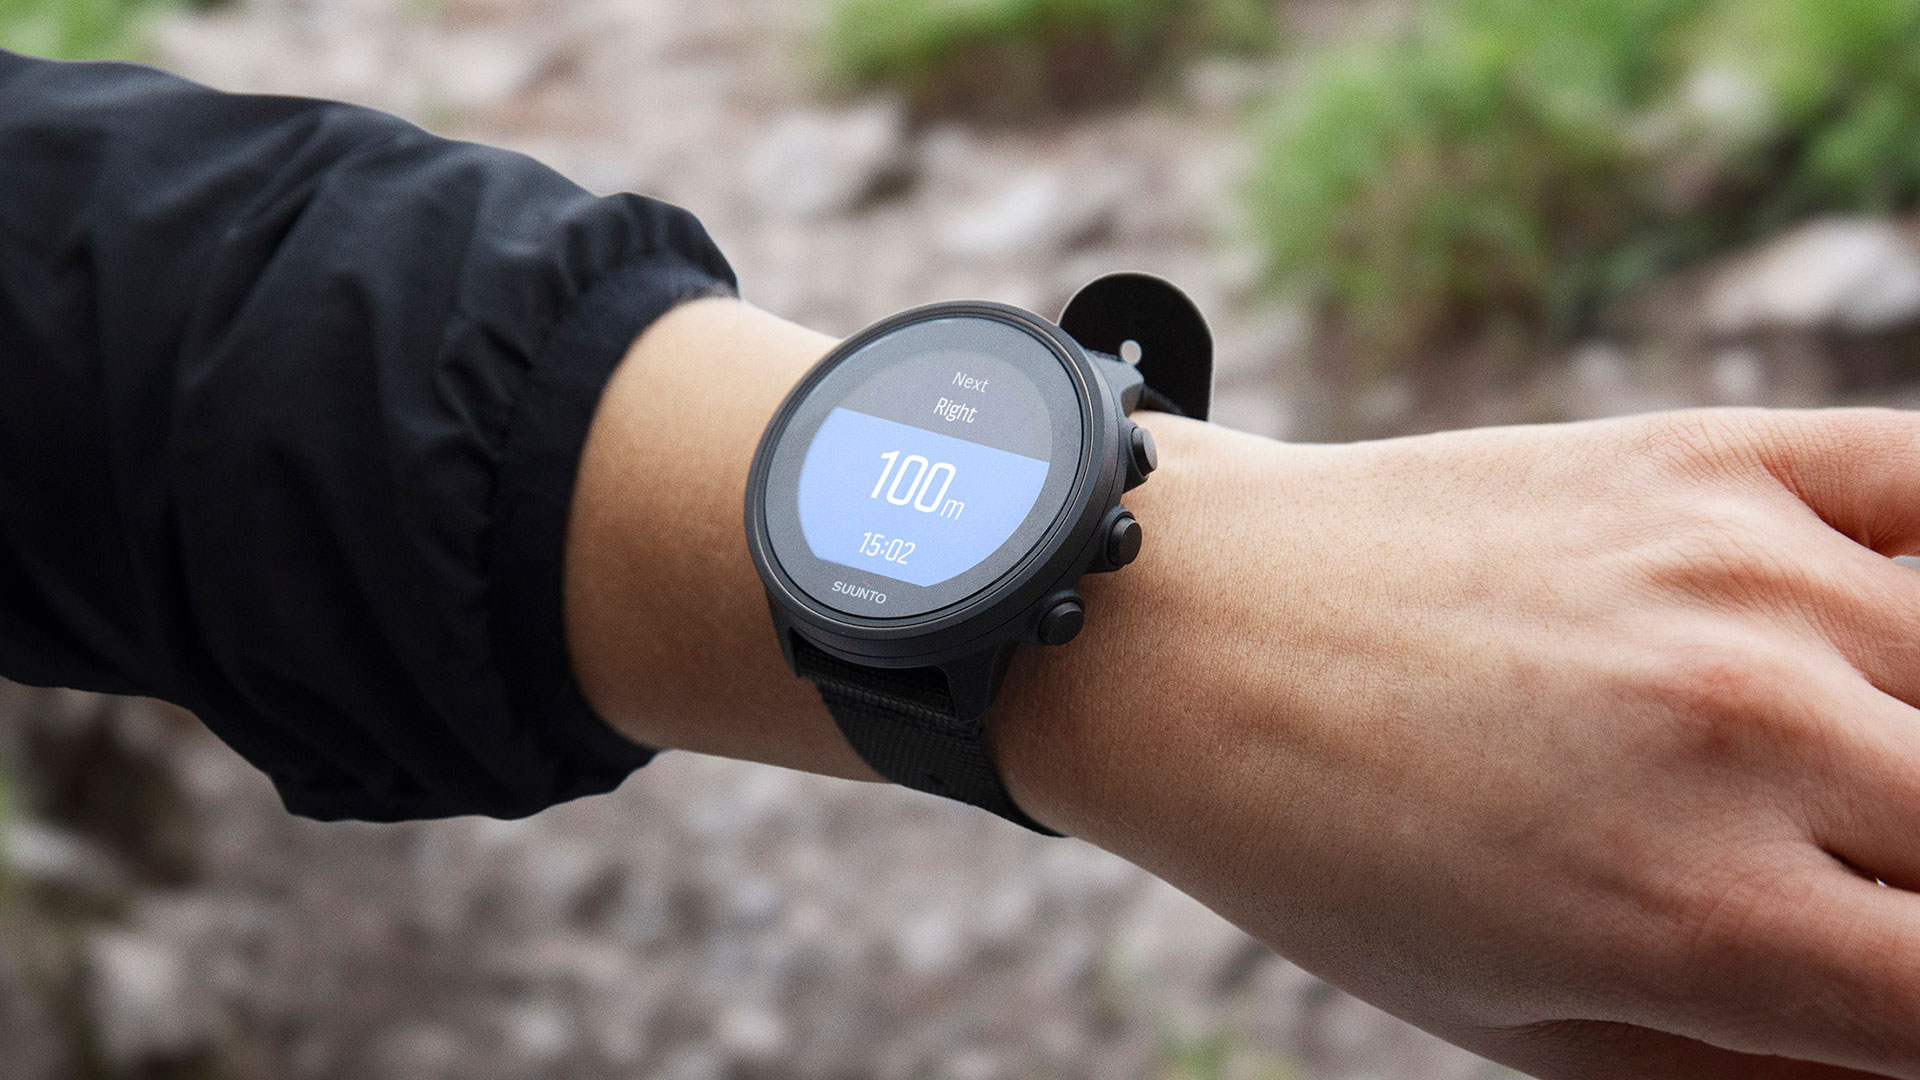 The Suunto 9 Baro represents our pick for the best multisport option from Suunto.